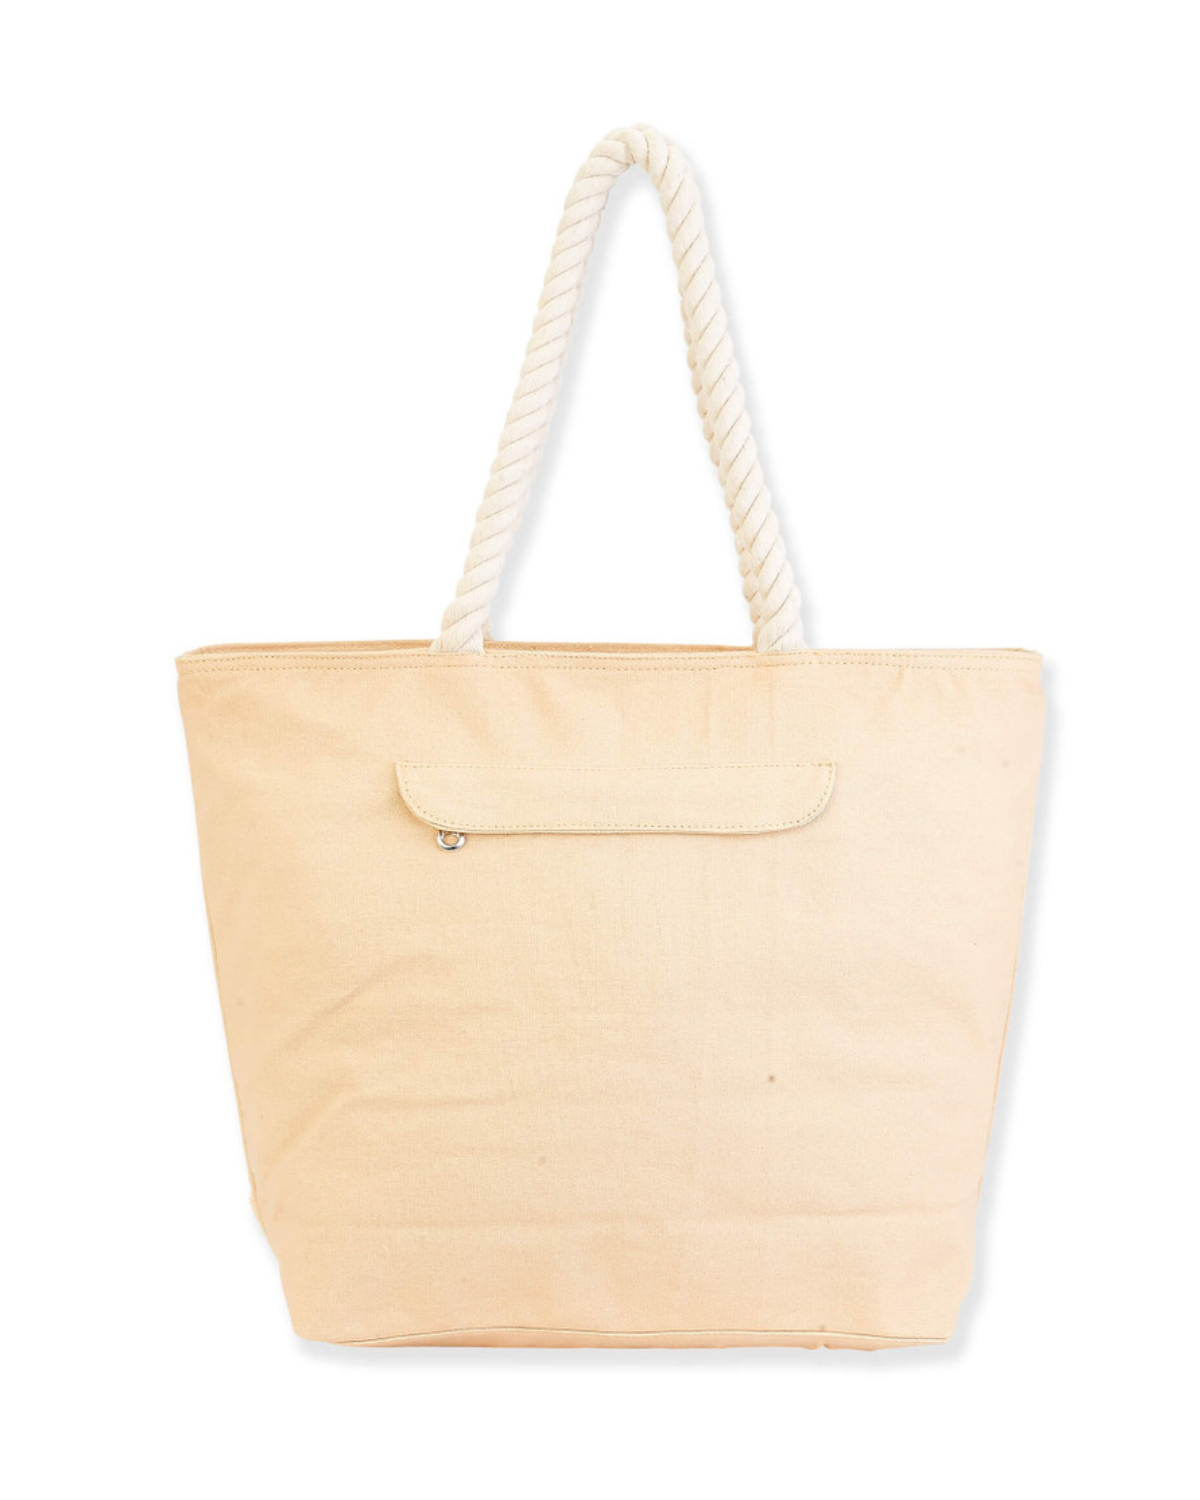 Sun N Sand Palm Leaf Beach Casuals Shoulder Tote (More colors available) - SNS6170